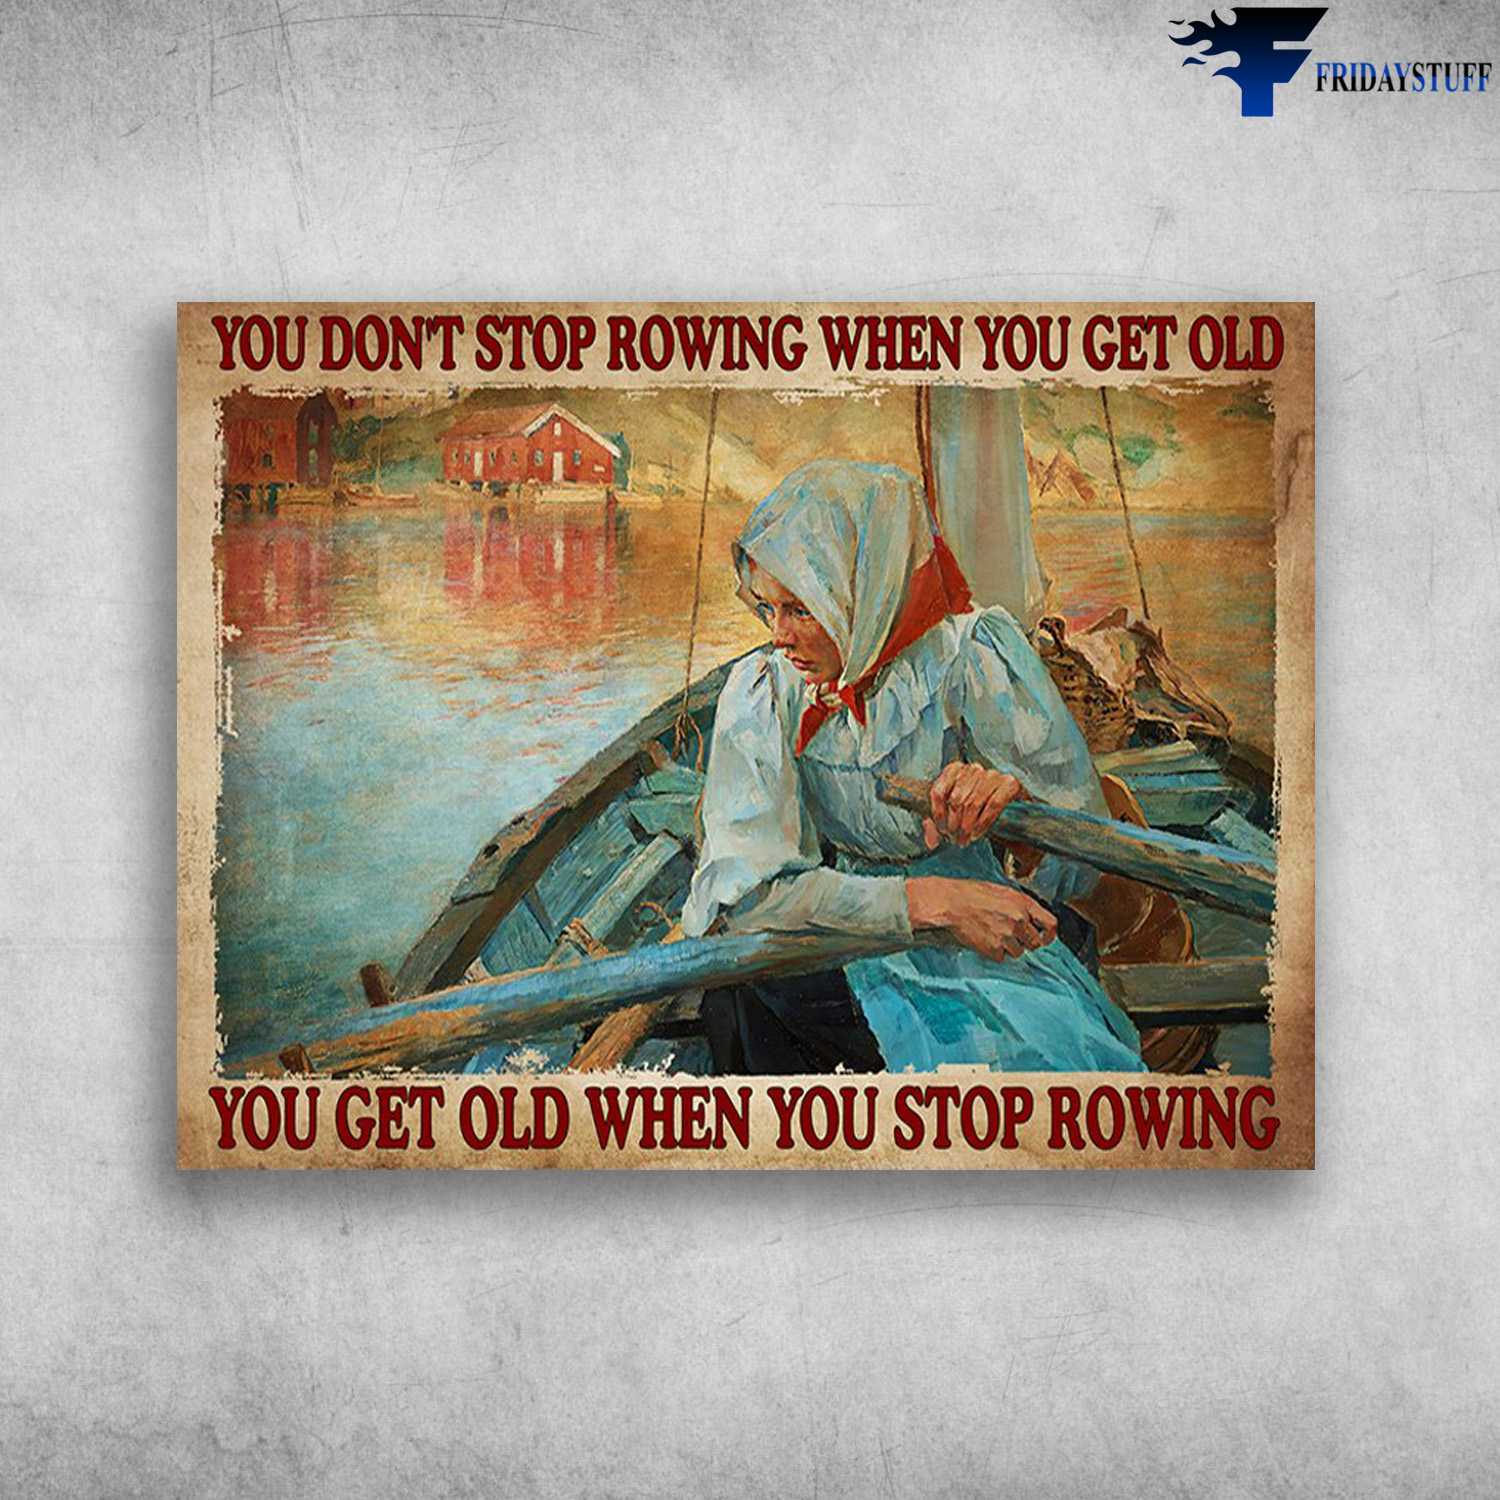 Rowing Girl, Rowing Poster - You Don't Stop Rowing When You Get Old, You Get Old When You Stop Rowing